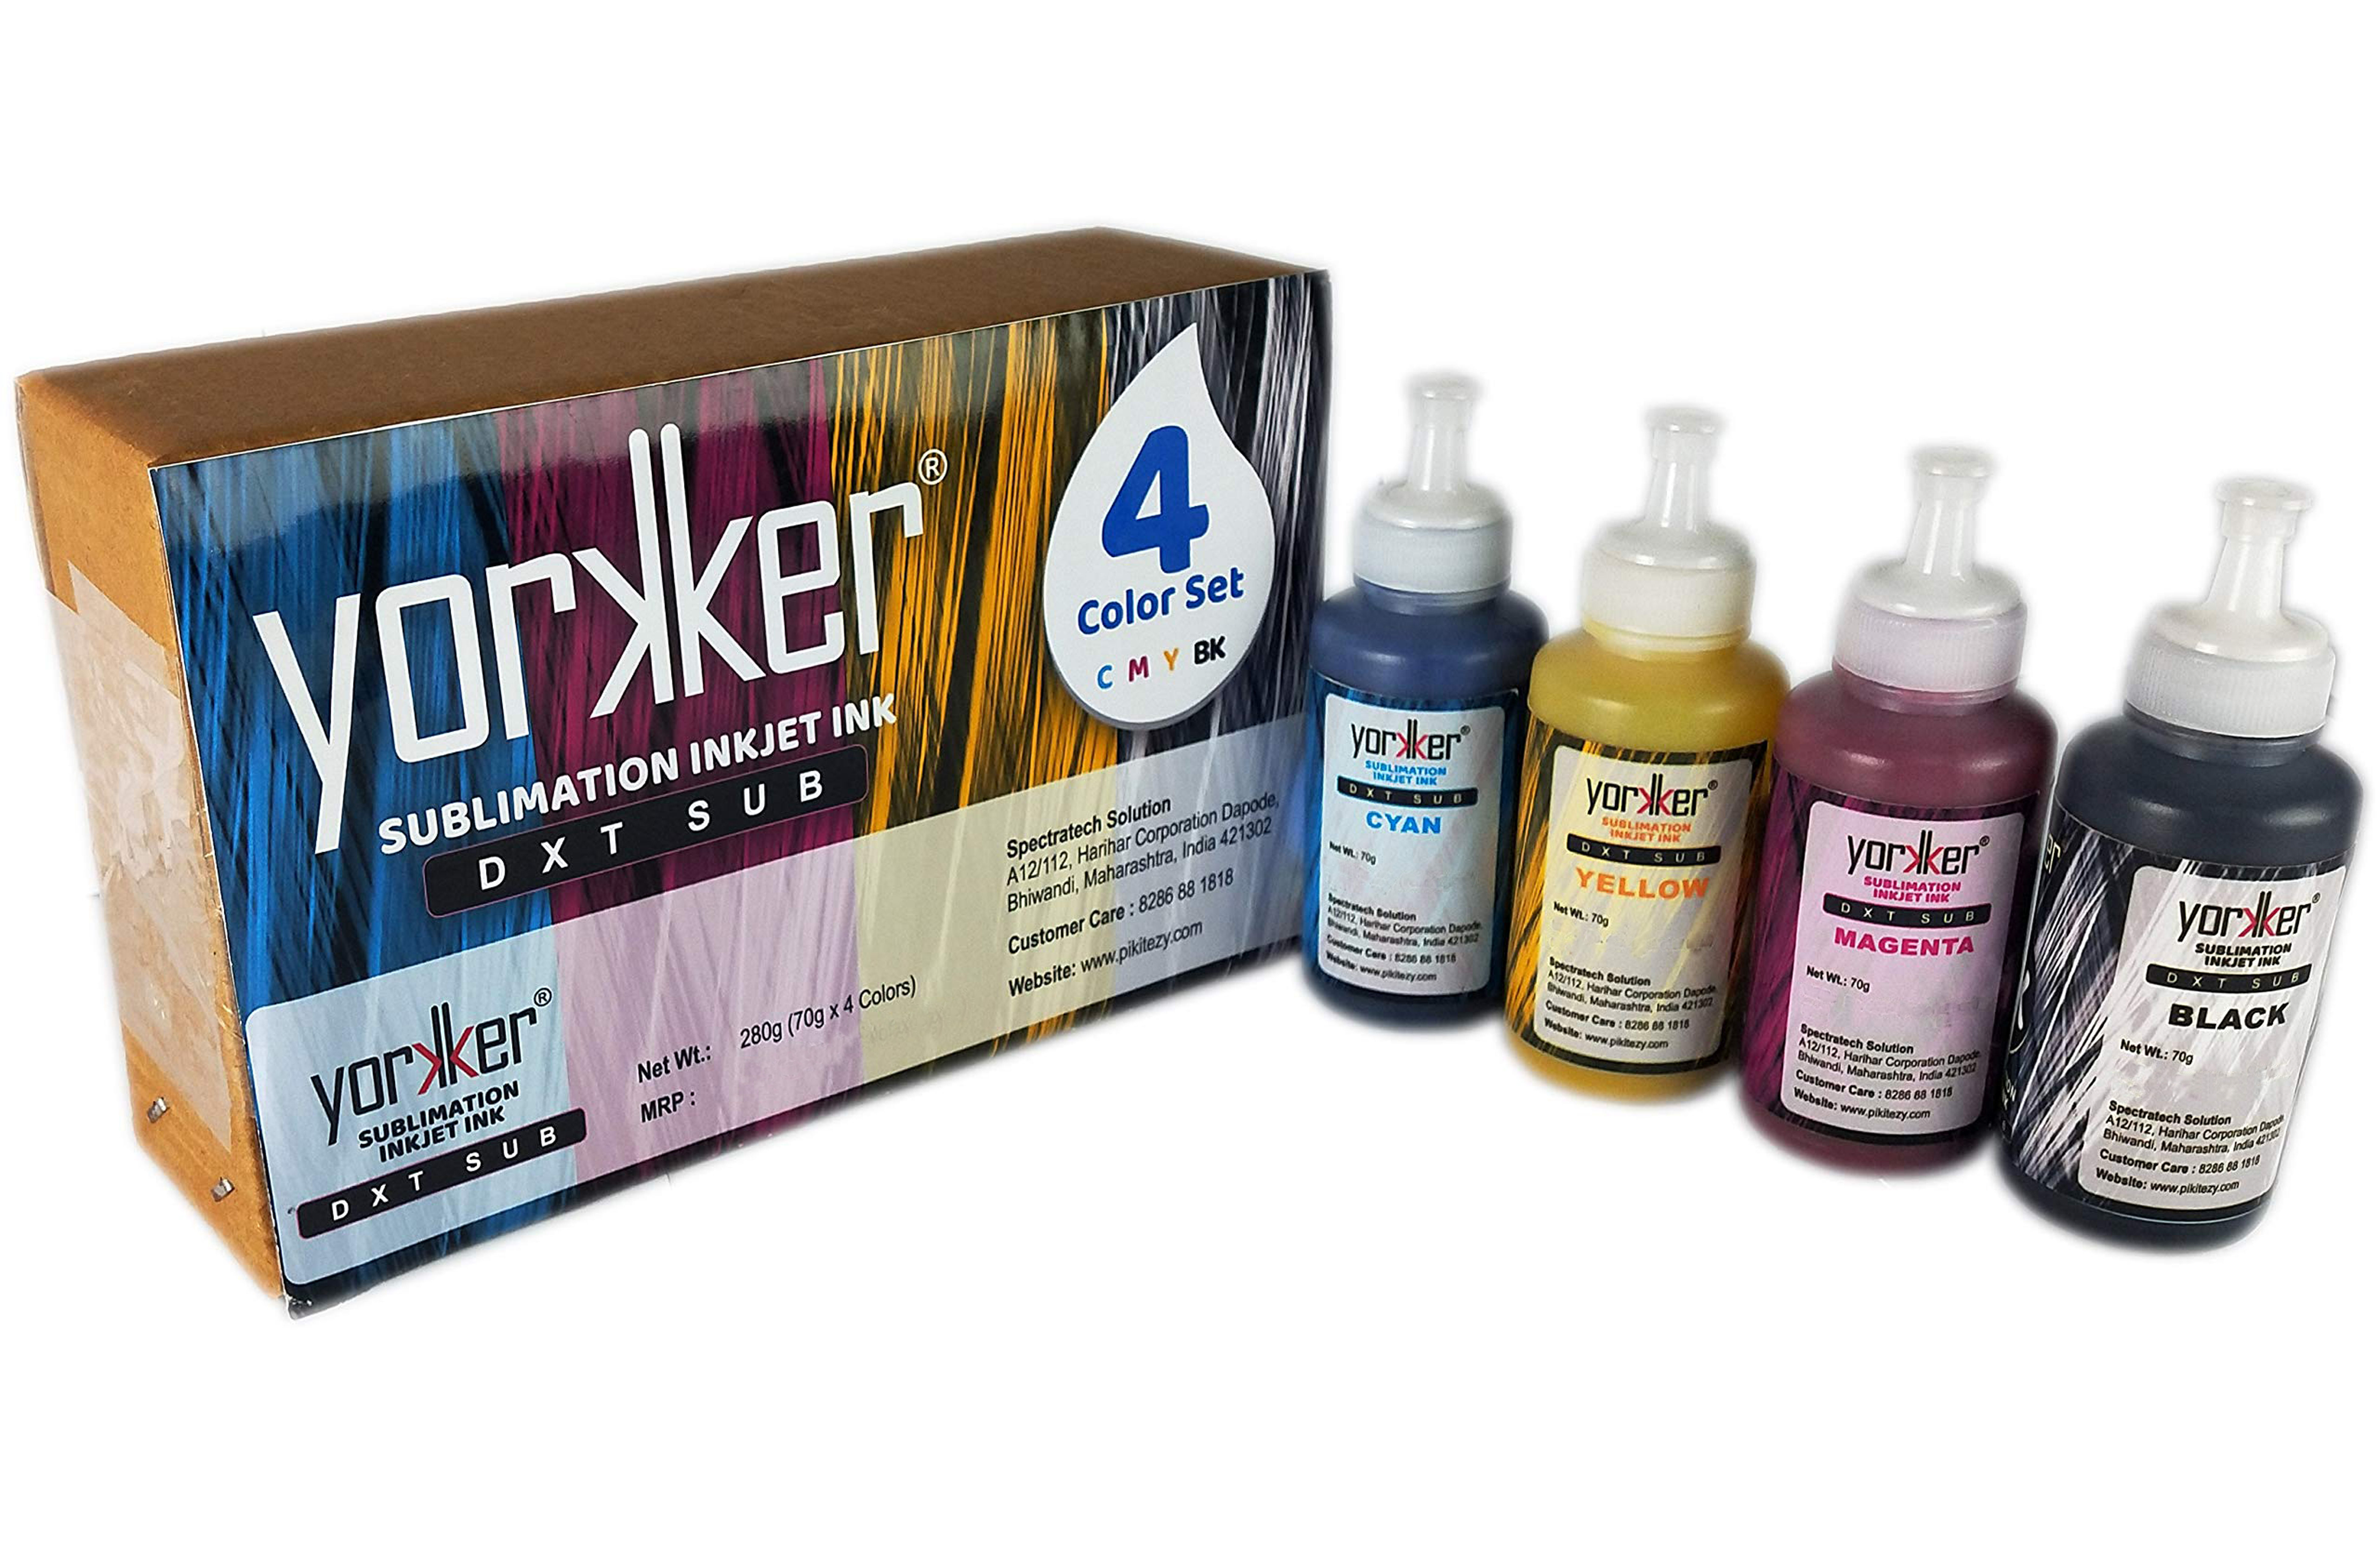 Yorkker Sublimation Ink DXT SUB for Heat Transfer Printing on Mugs